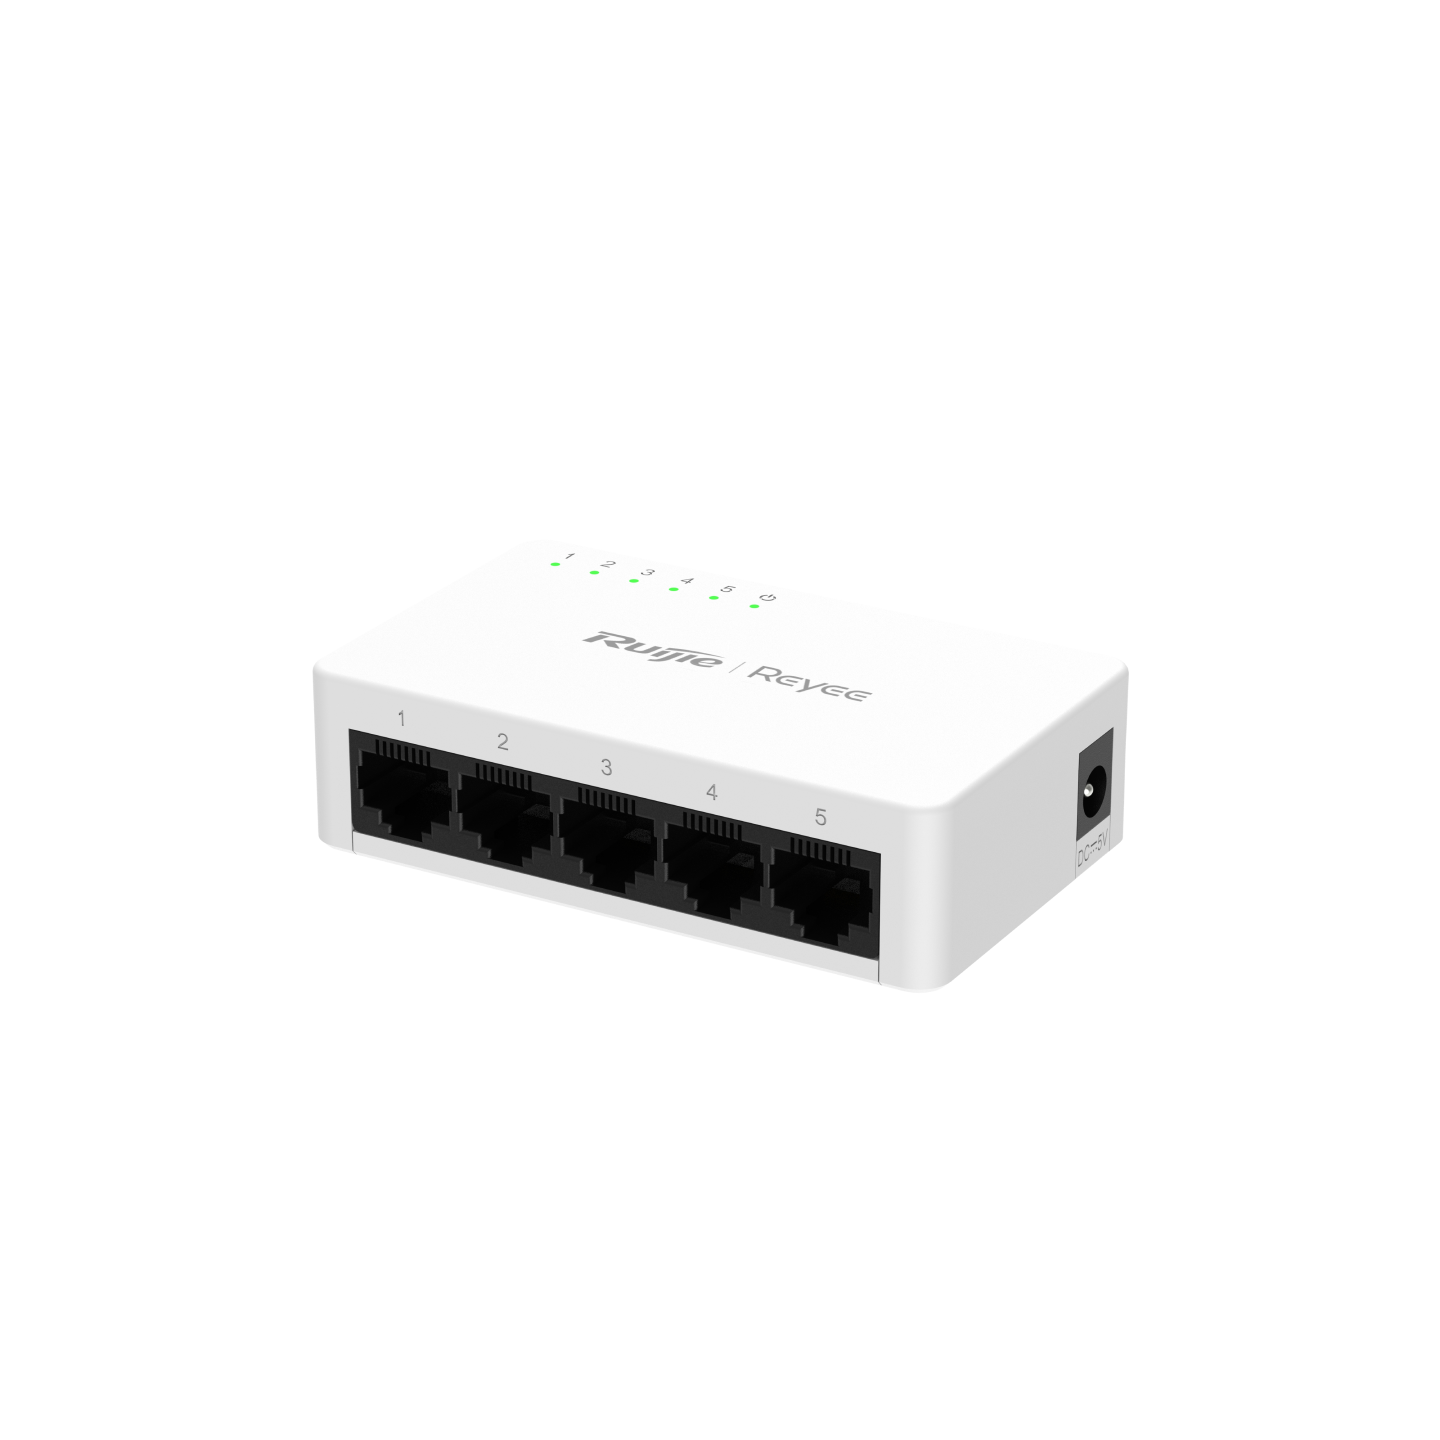 RG-ES05F, 5-Port 10/100 Mbps Unmanaged Non-PoE Switch- Ruijie Reyee ...